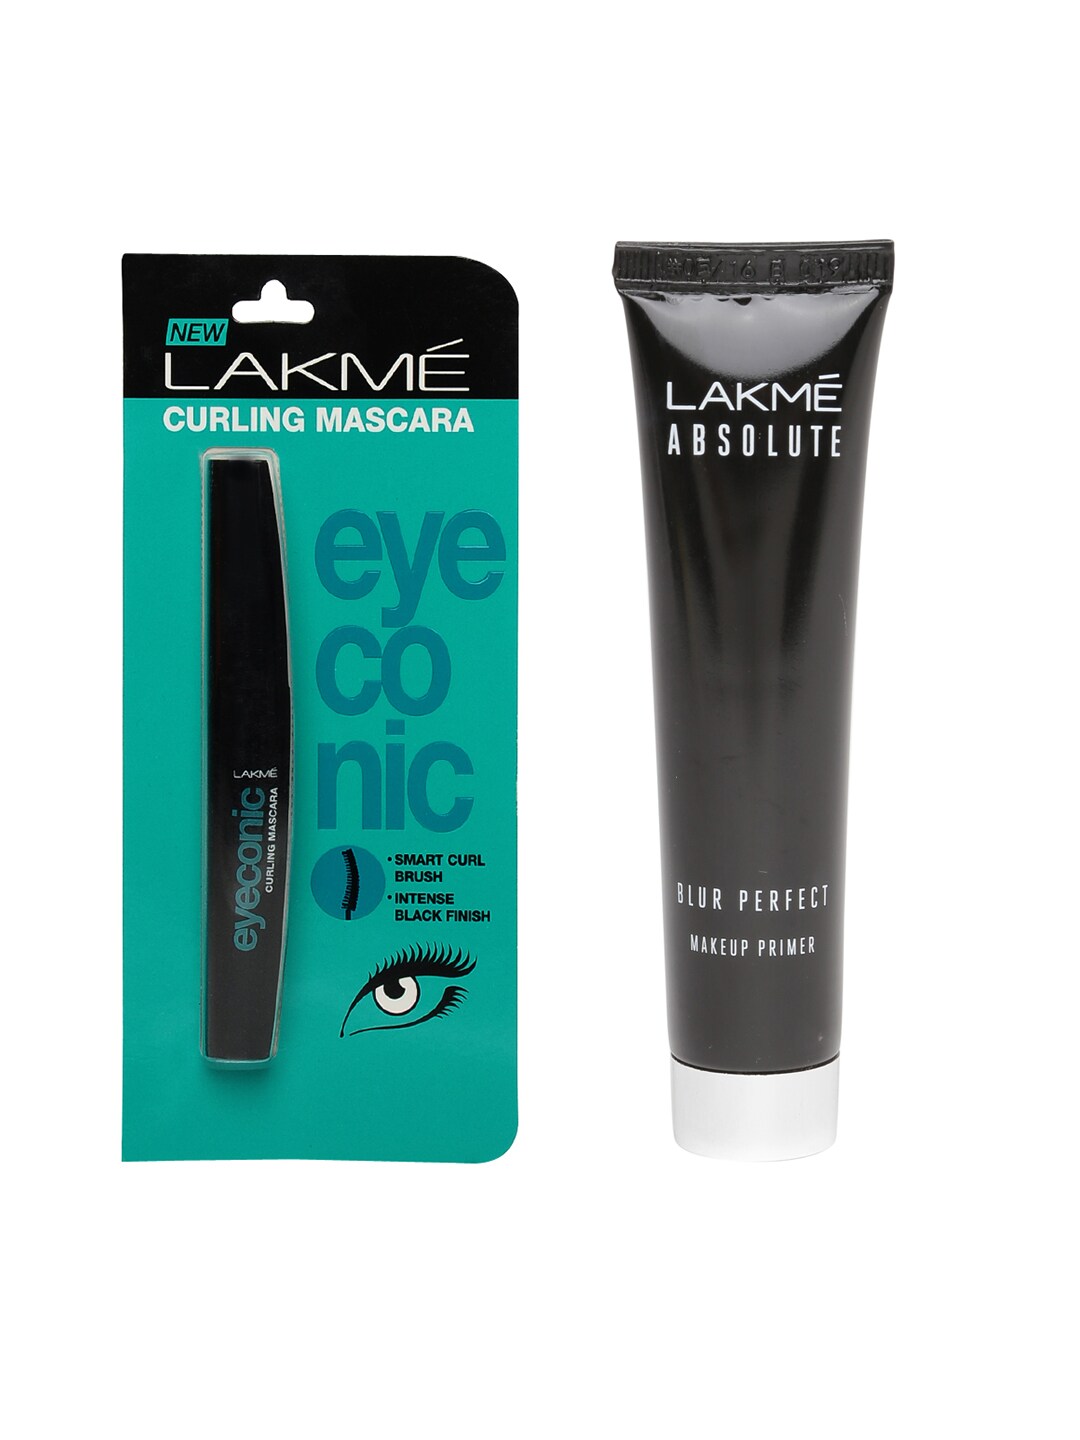 Lakme Set of Eyeconic Curling Mascara & Absolute Blur Perfect Makeup Primer Price in India